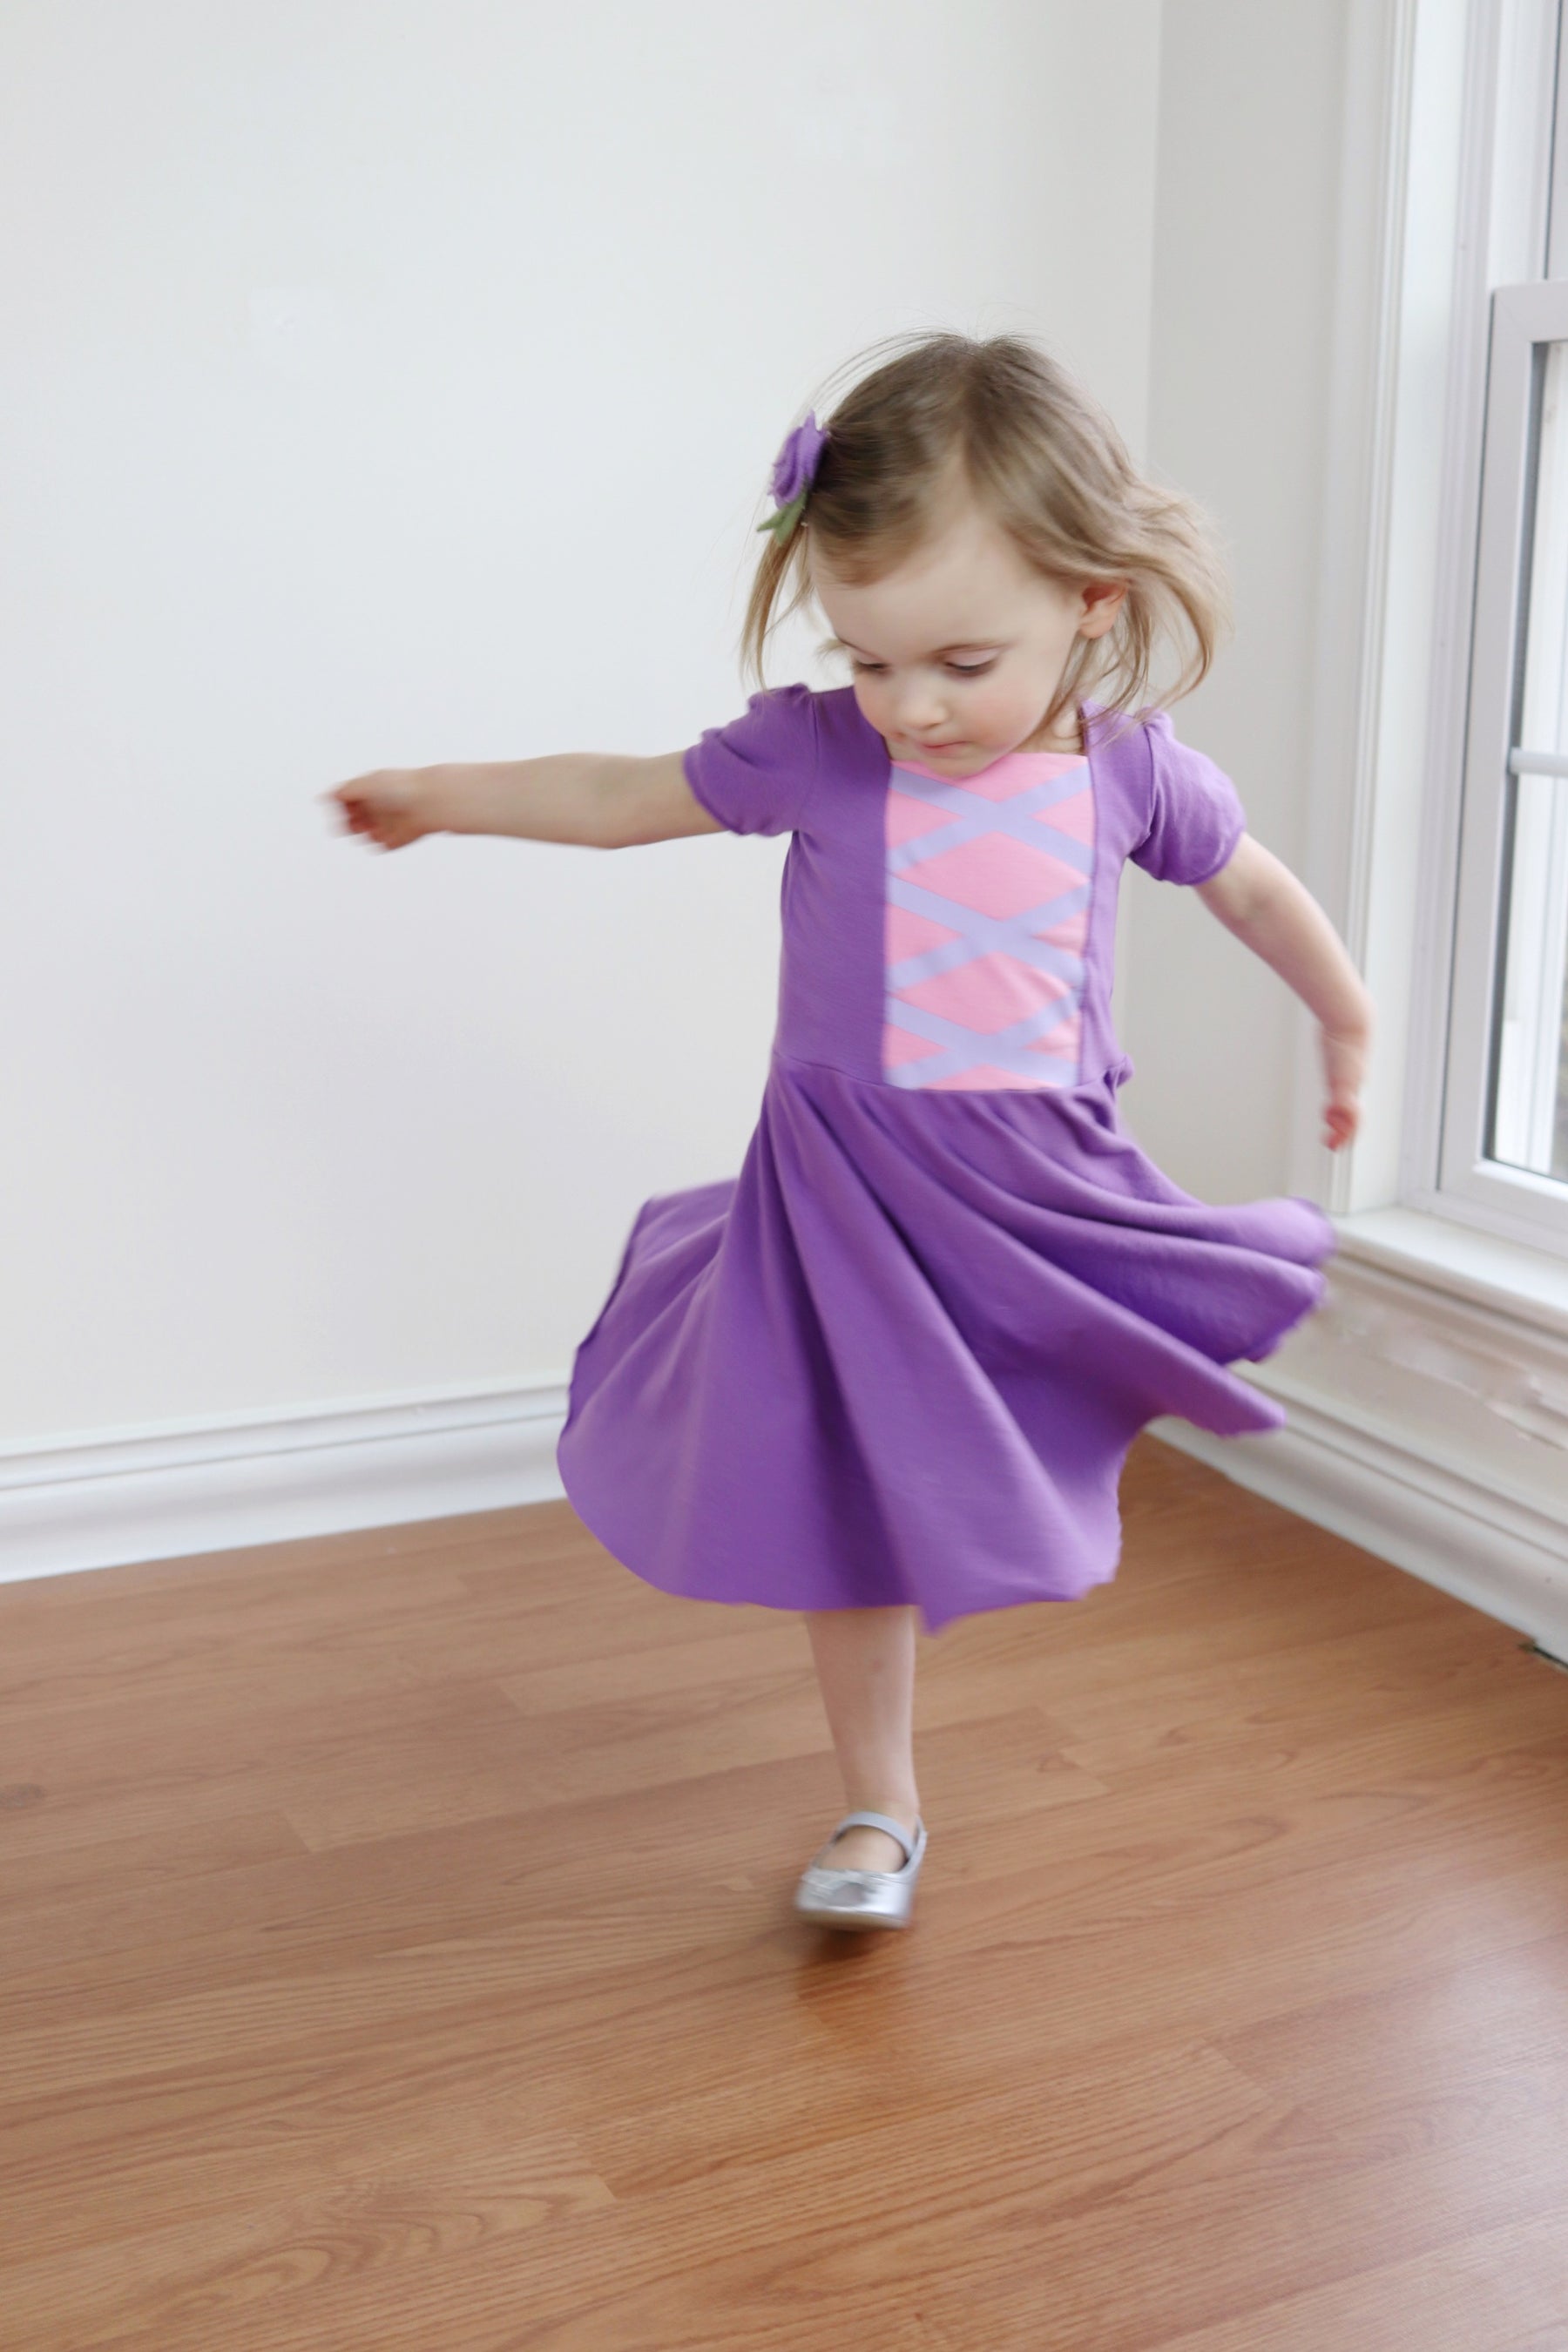 CLEARANCE SALE - Once Upon a Princess Capsule